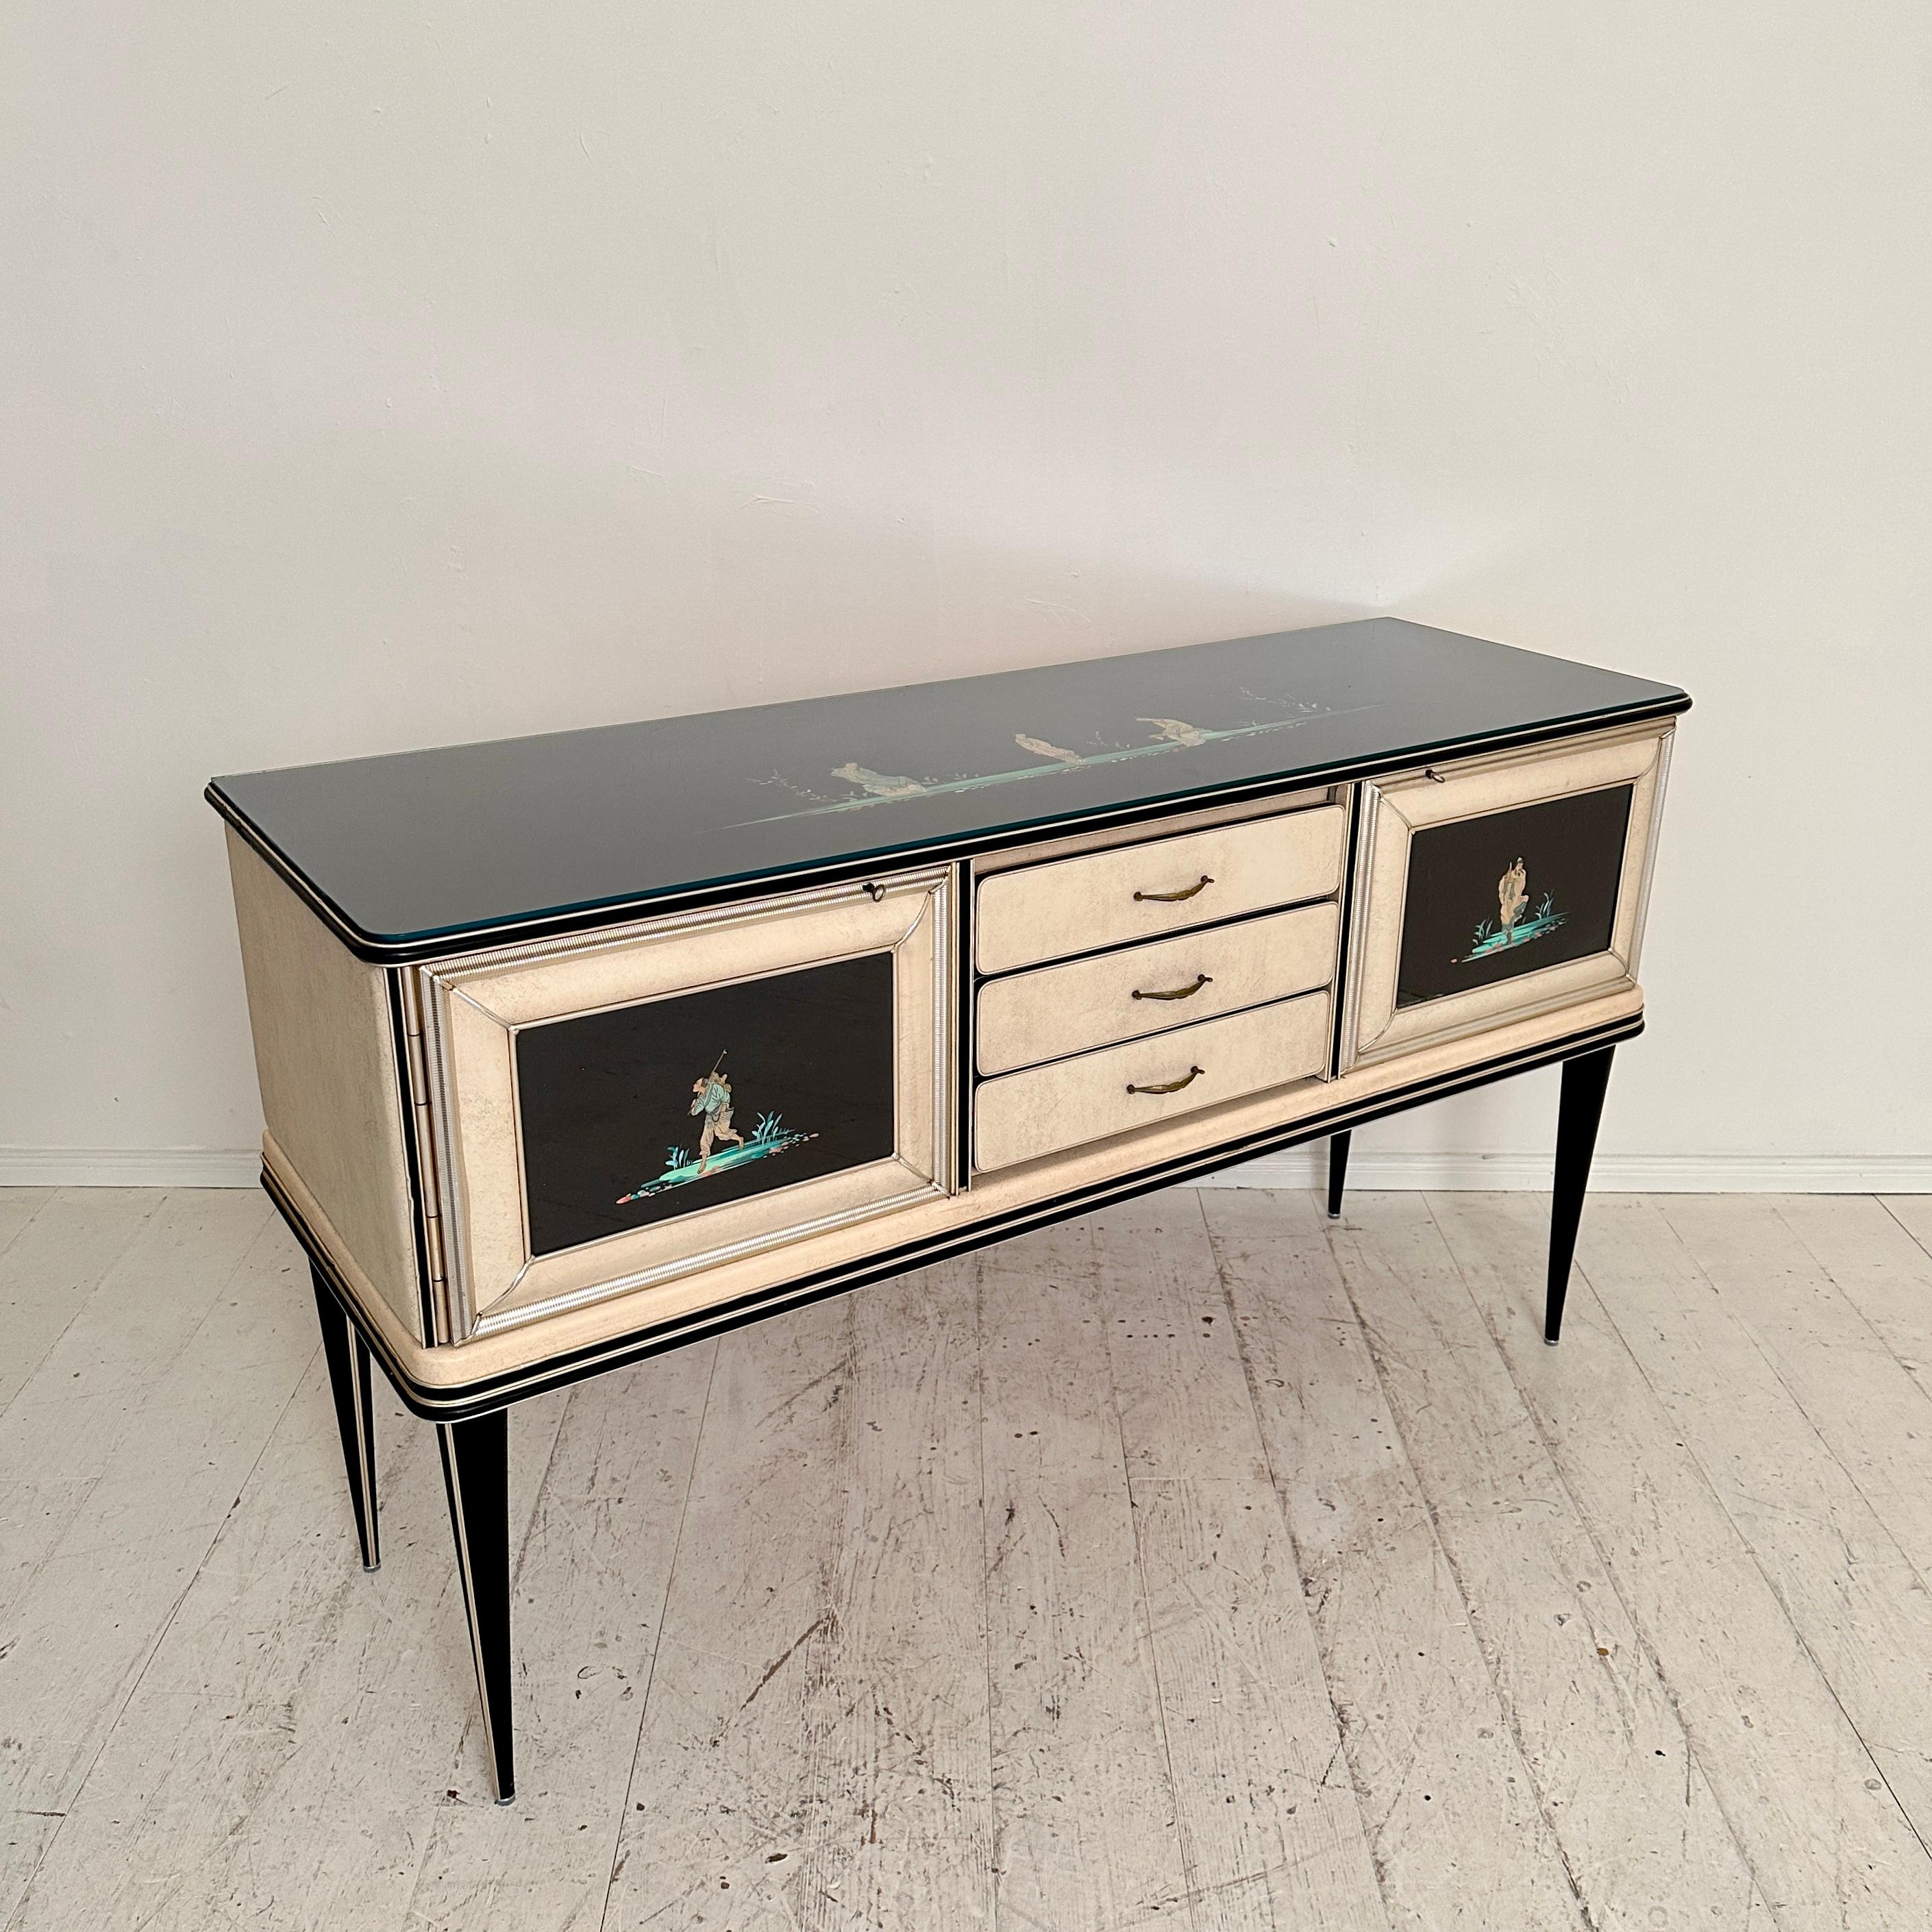 Mid-Century Chinoserie Sideboard by Umberto Mascagni for Harrods London, 1953 For Sale 5